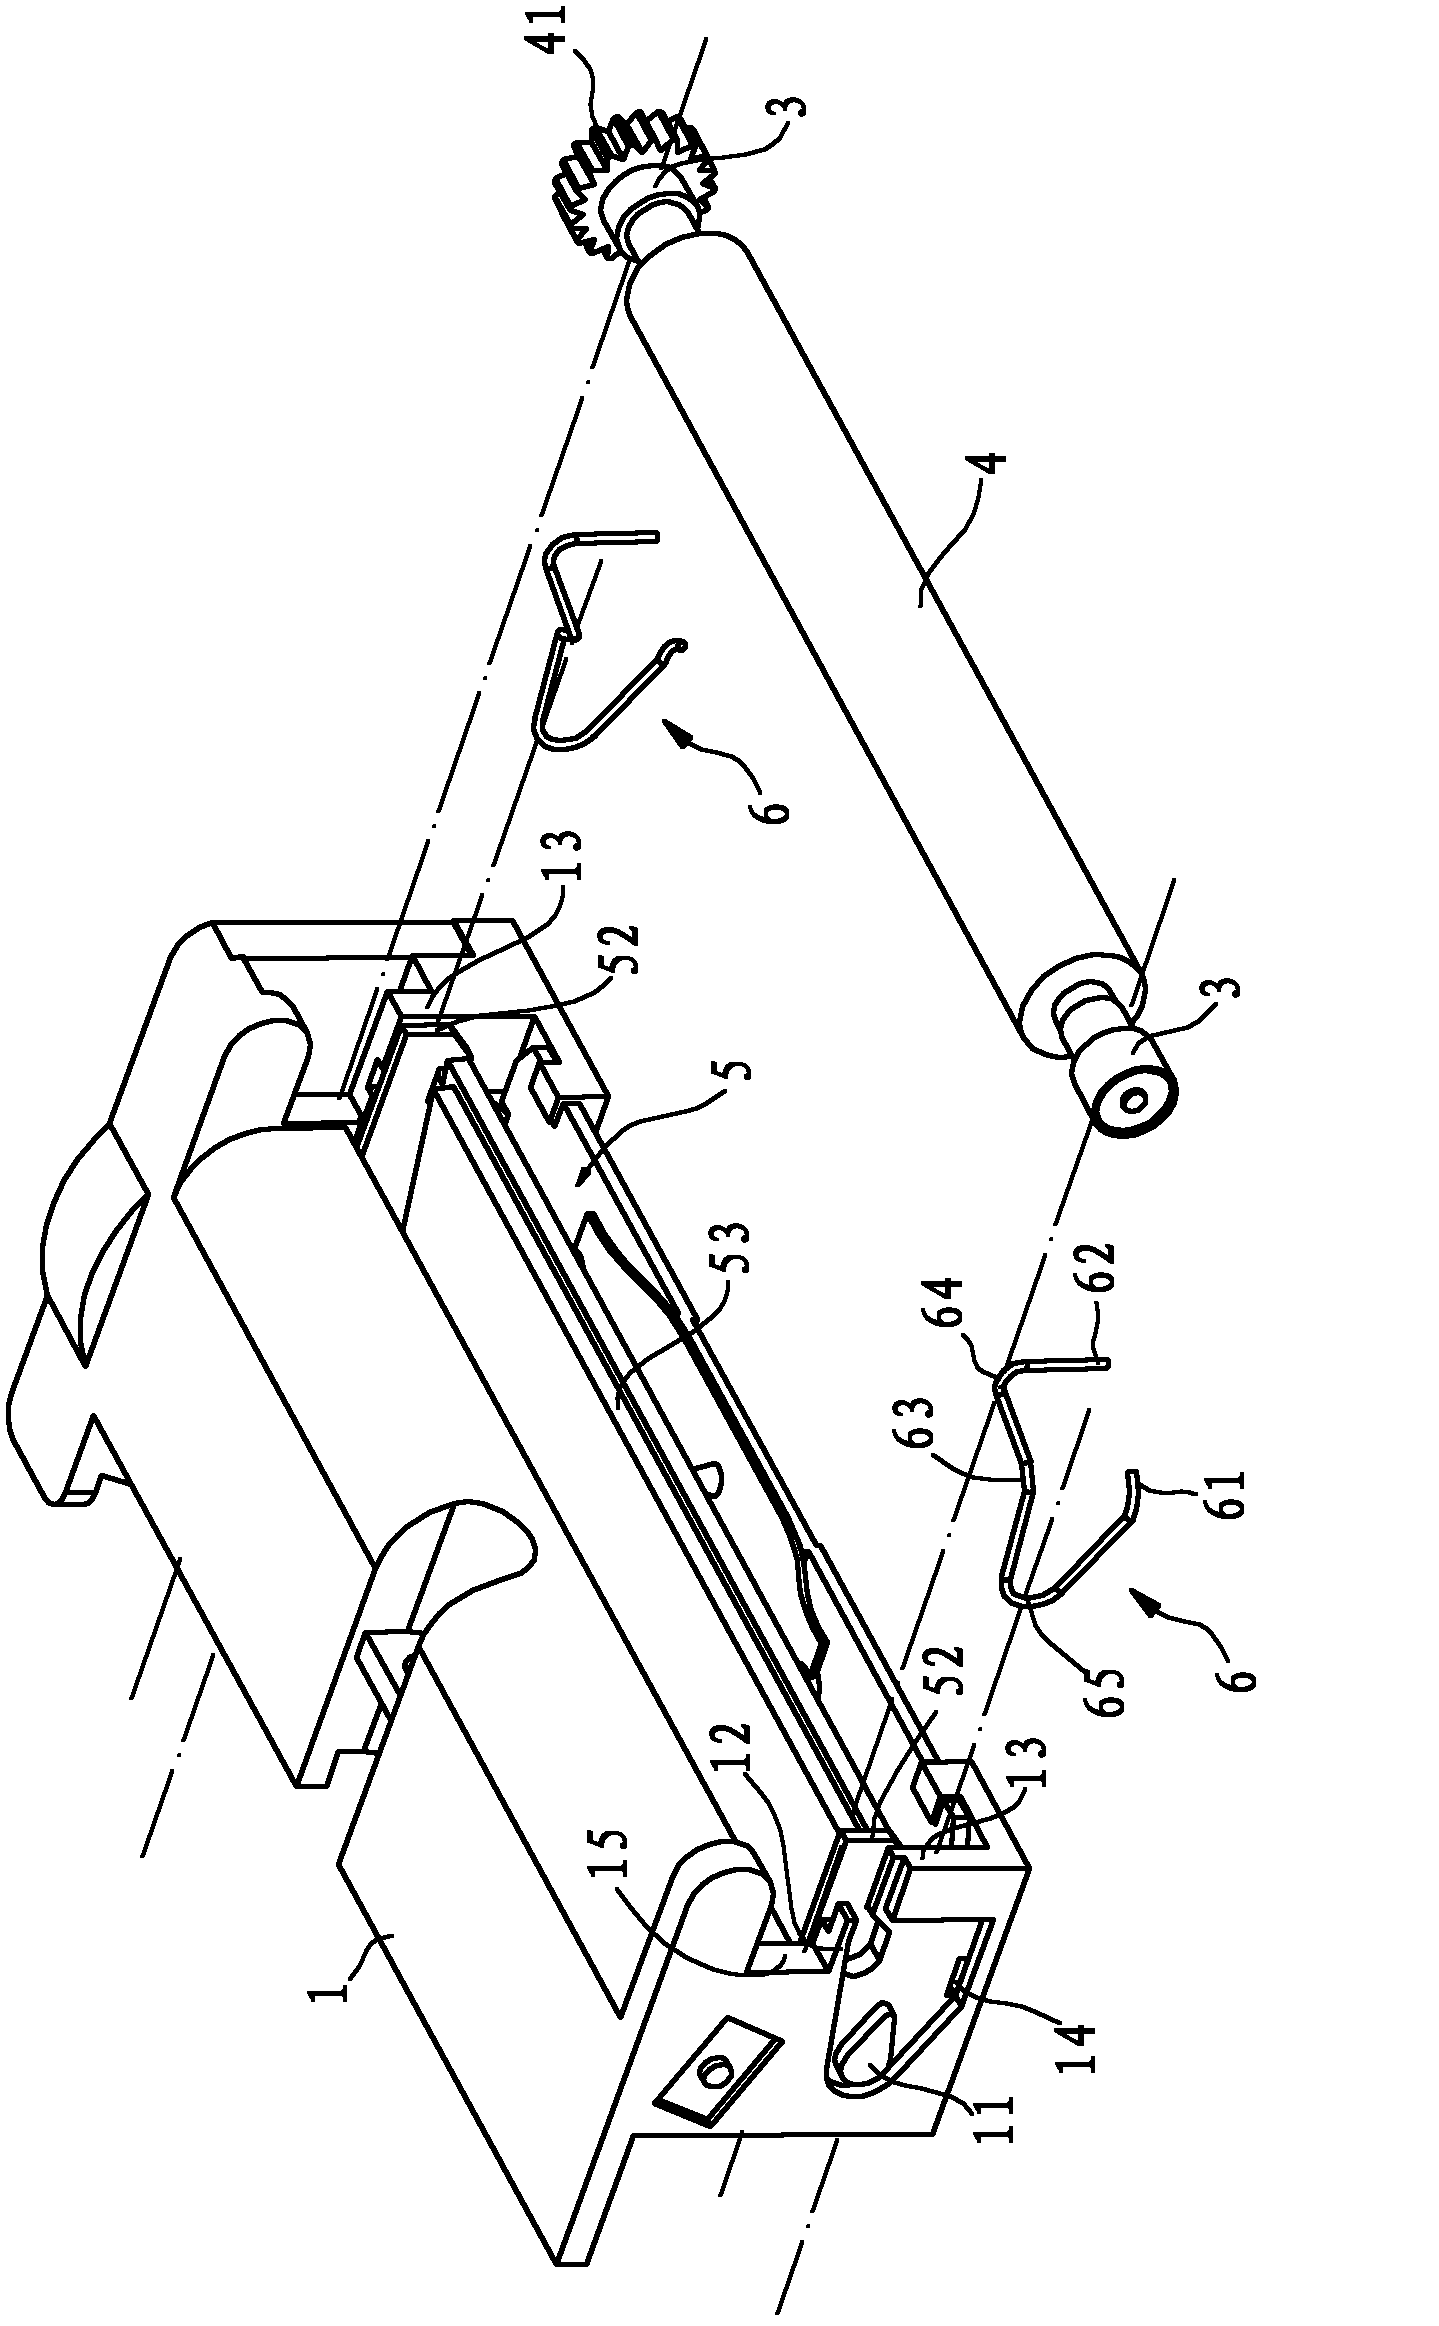 Assembly structure for rack and rubber roll as well as thermal printer applying assembly structure